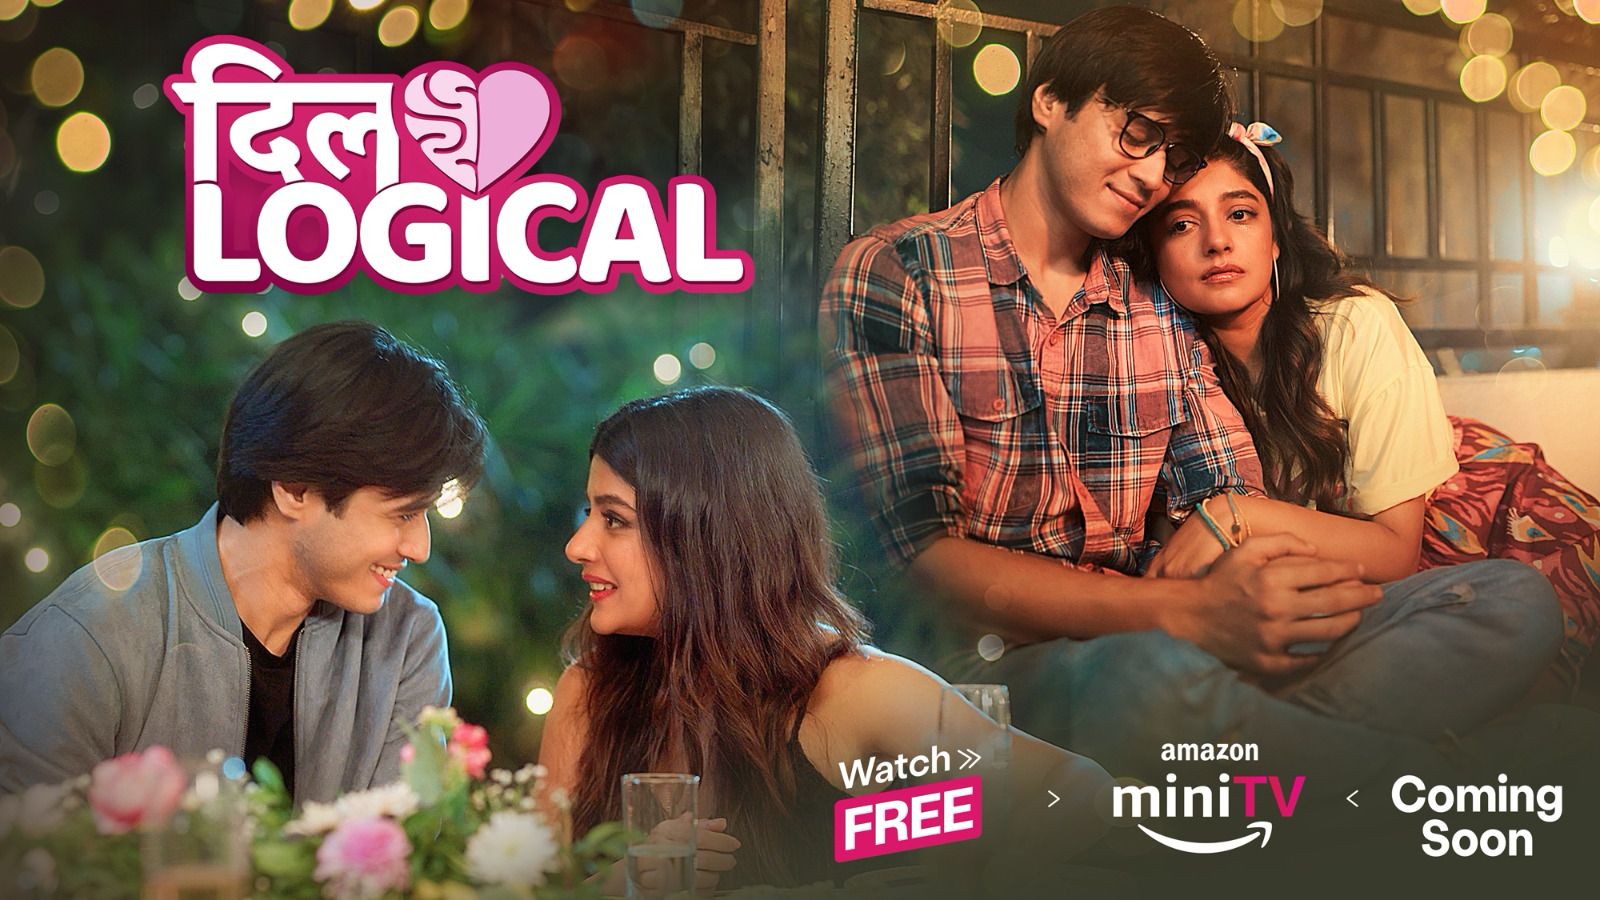 ‘Dillogical’ is a romantic comedy with a modern-day take on love and friendship!